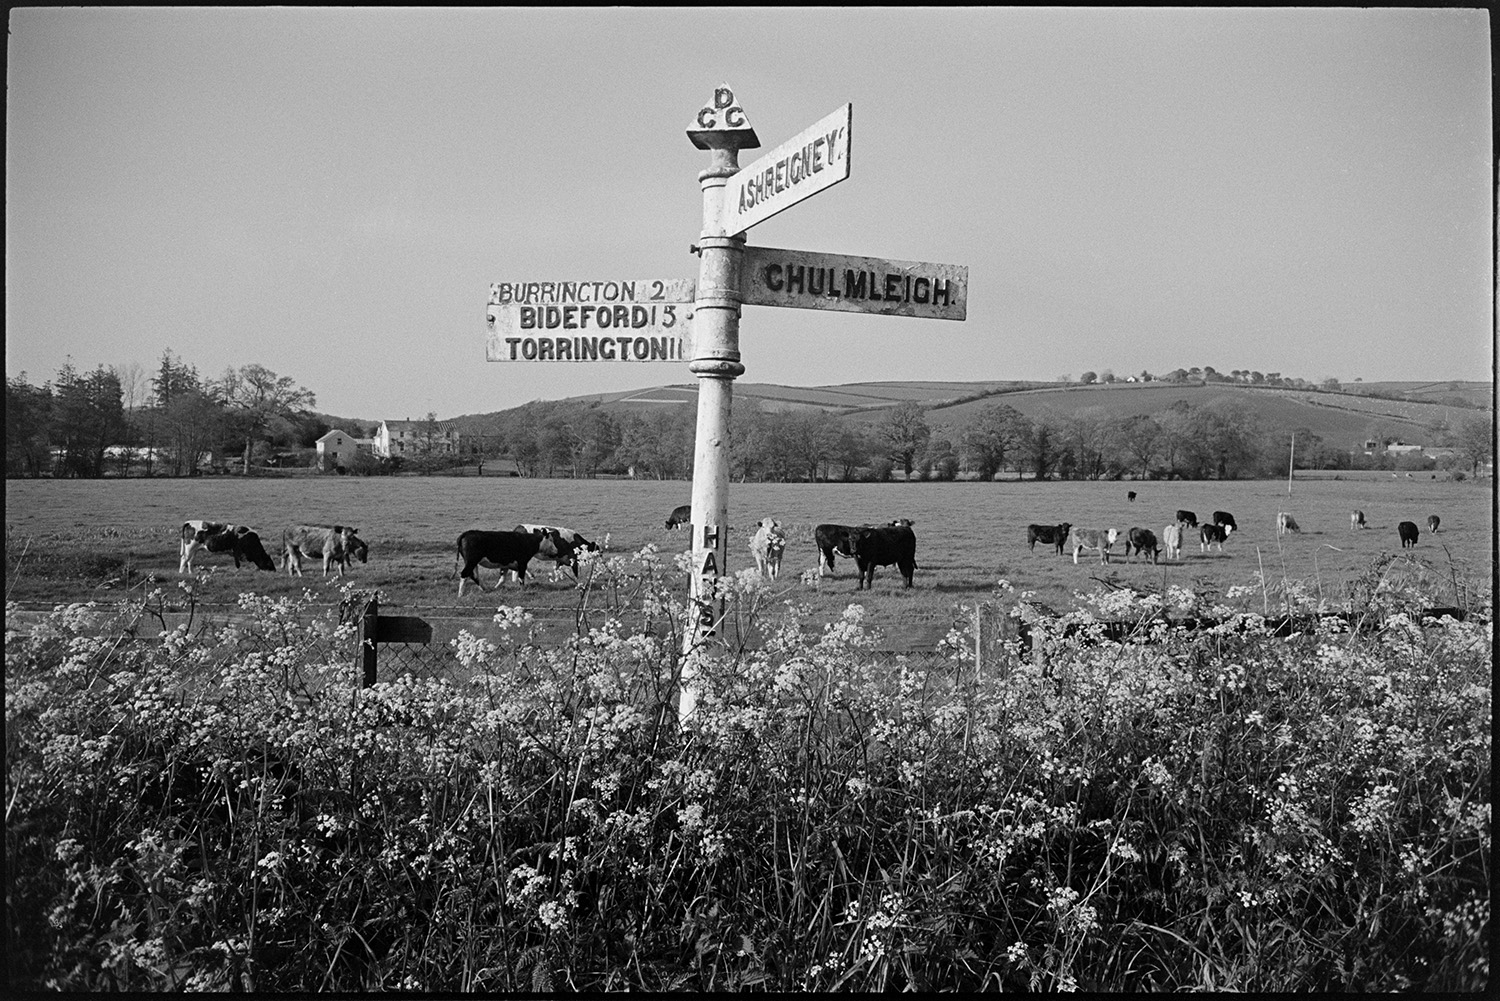 Landscape with old cast iron road sign. Cow parsley.
[An iron signpost in a hedge with wild flowers at Hansford Cross, Ashreigney.  Cattle are grazing in the field and views of surrounding countryside fields and trees can be seen in the background.]